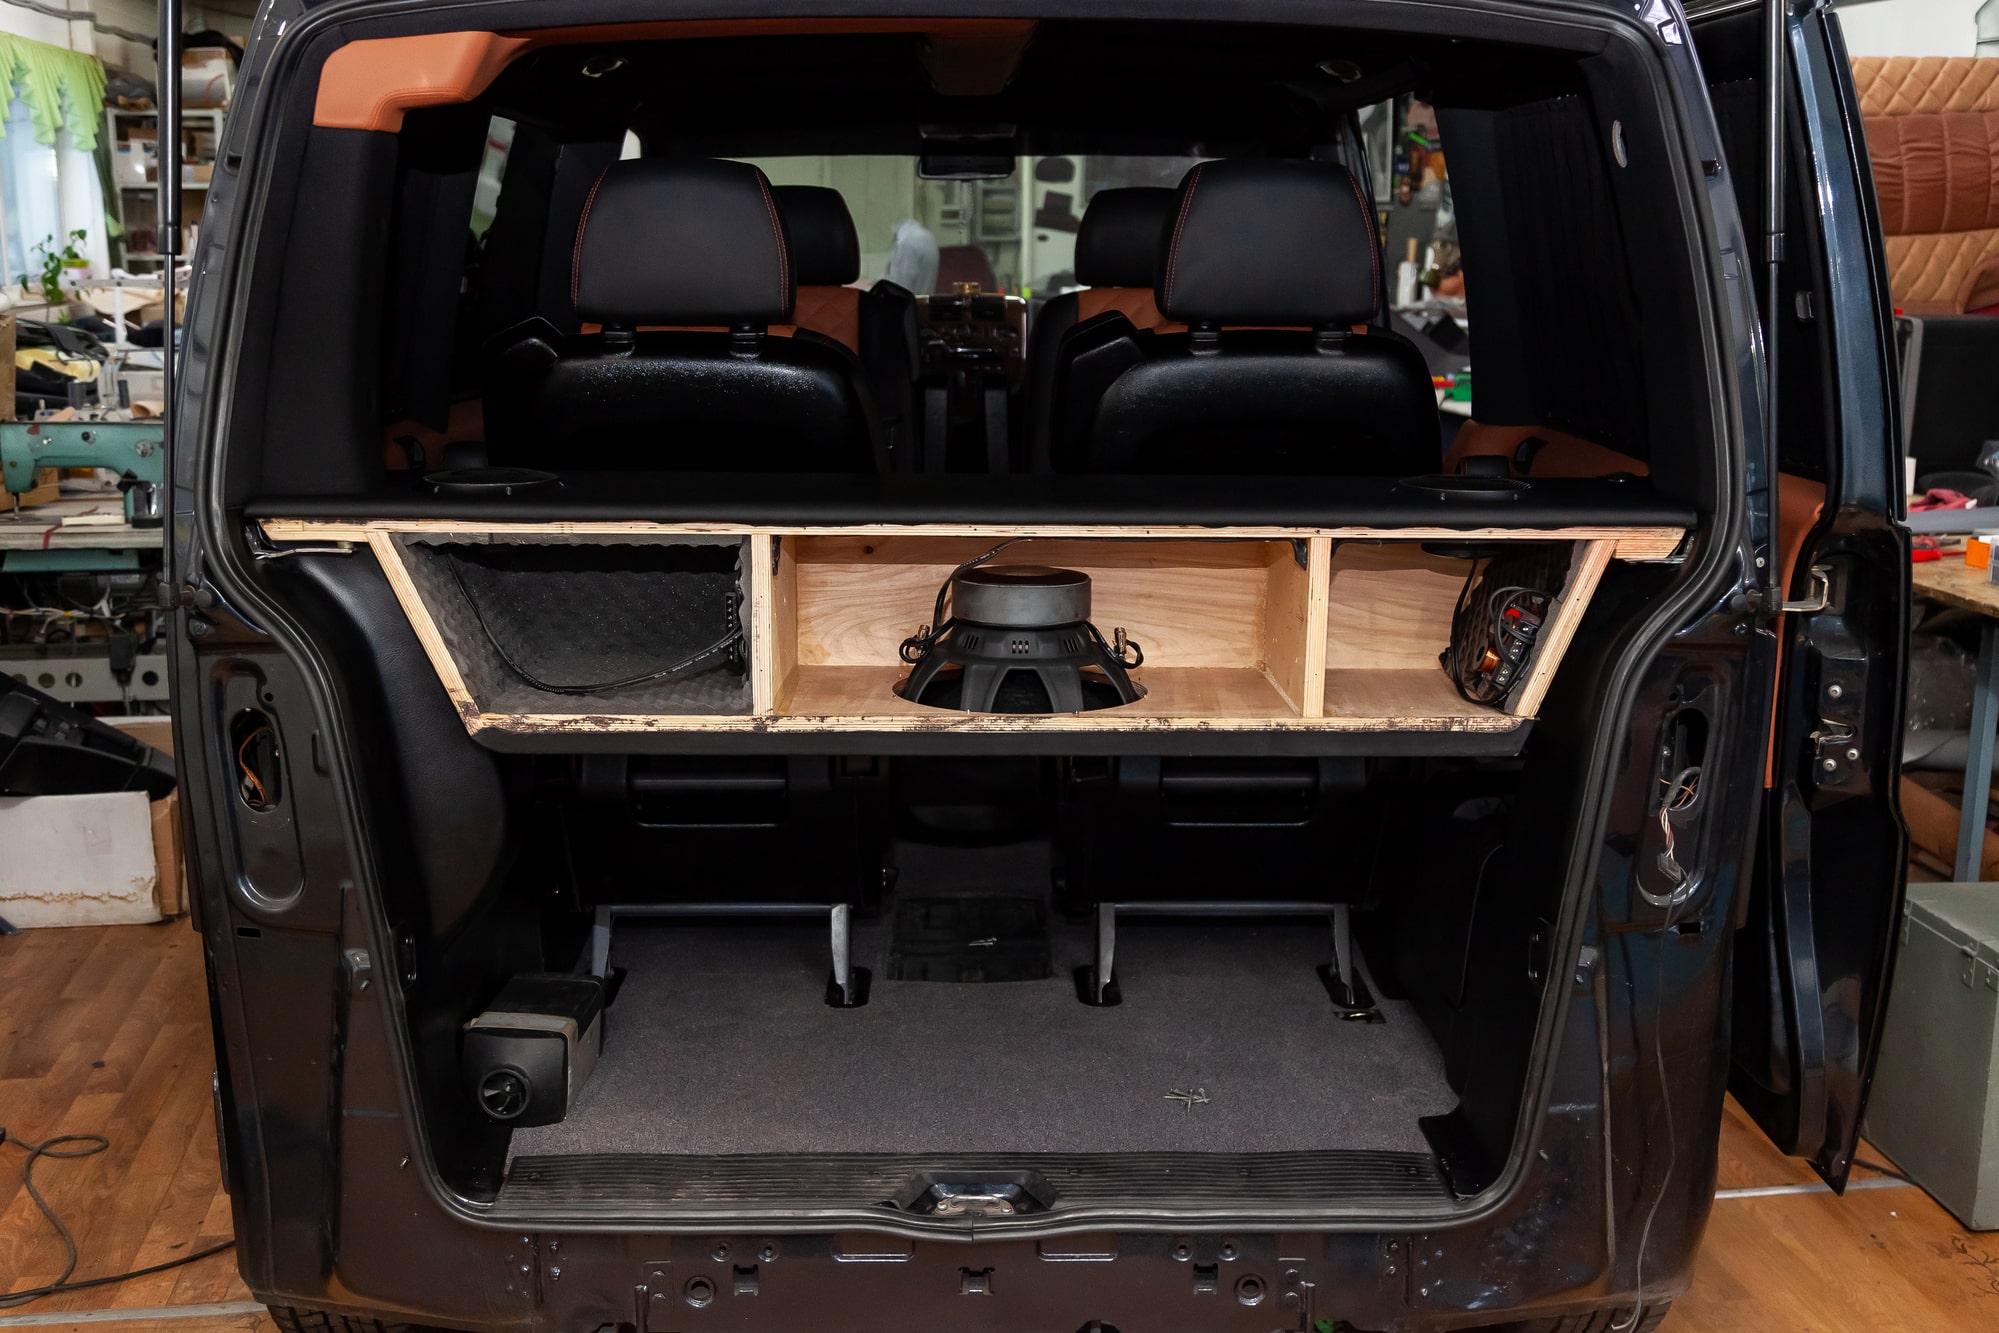 A box made of wood and sawn holes with black leather for the installation of subwoofers and speakers for an audio system with a loud sound and bass in van car trunk.